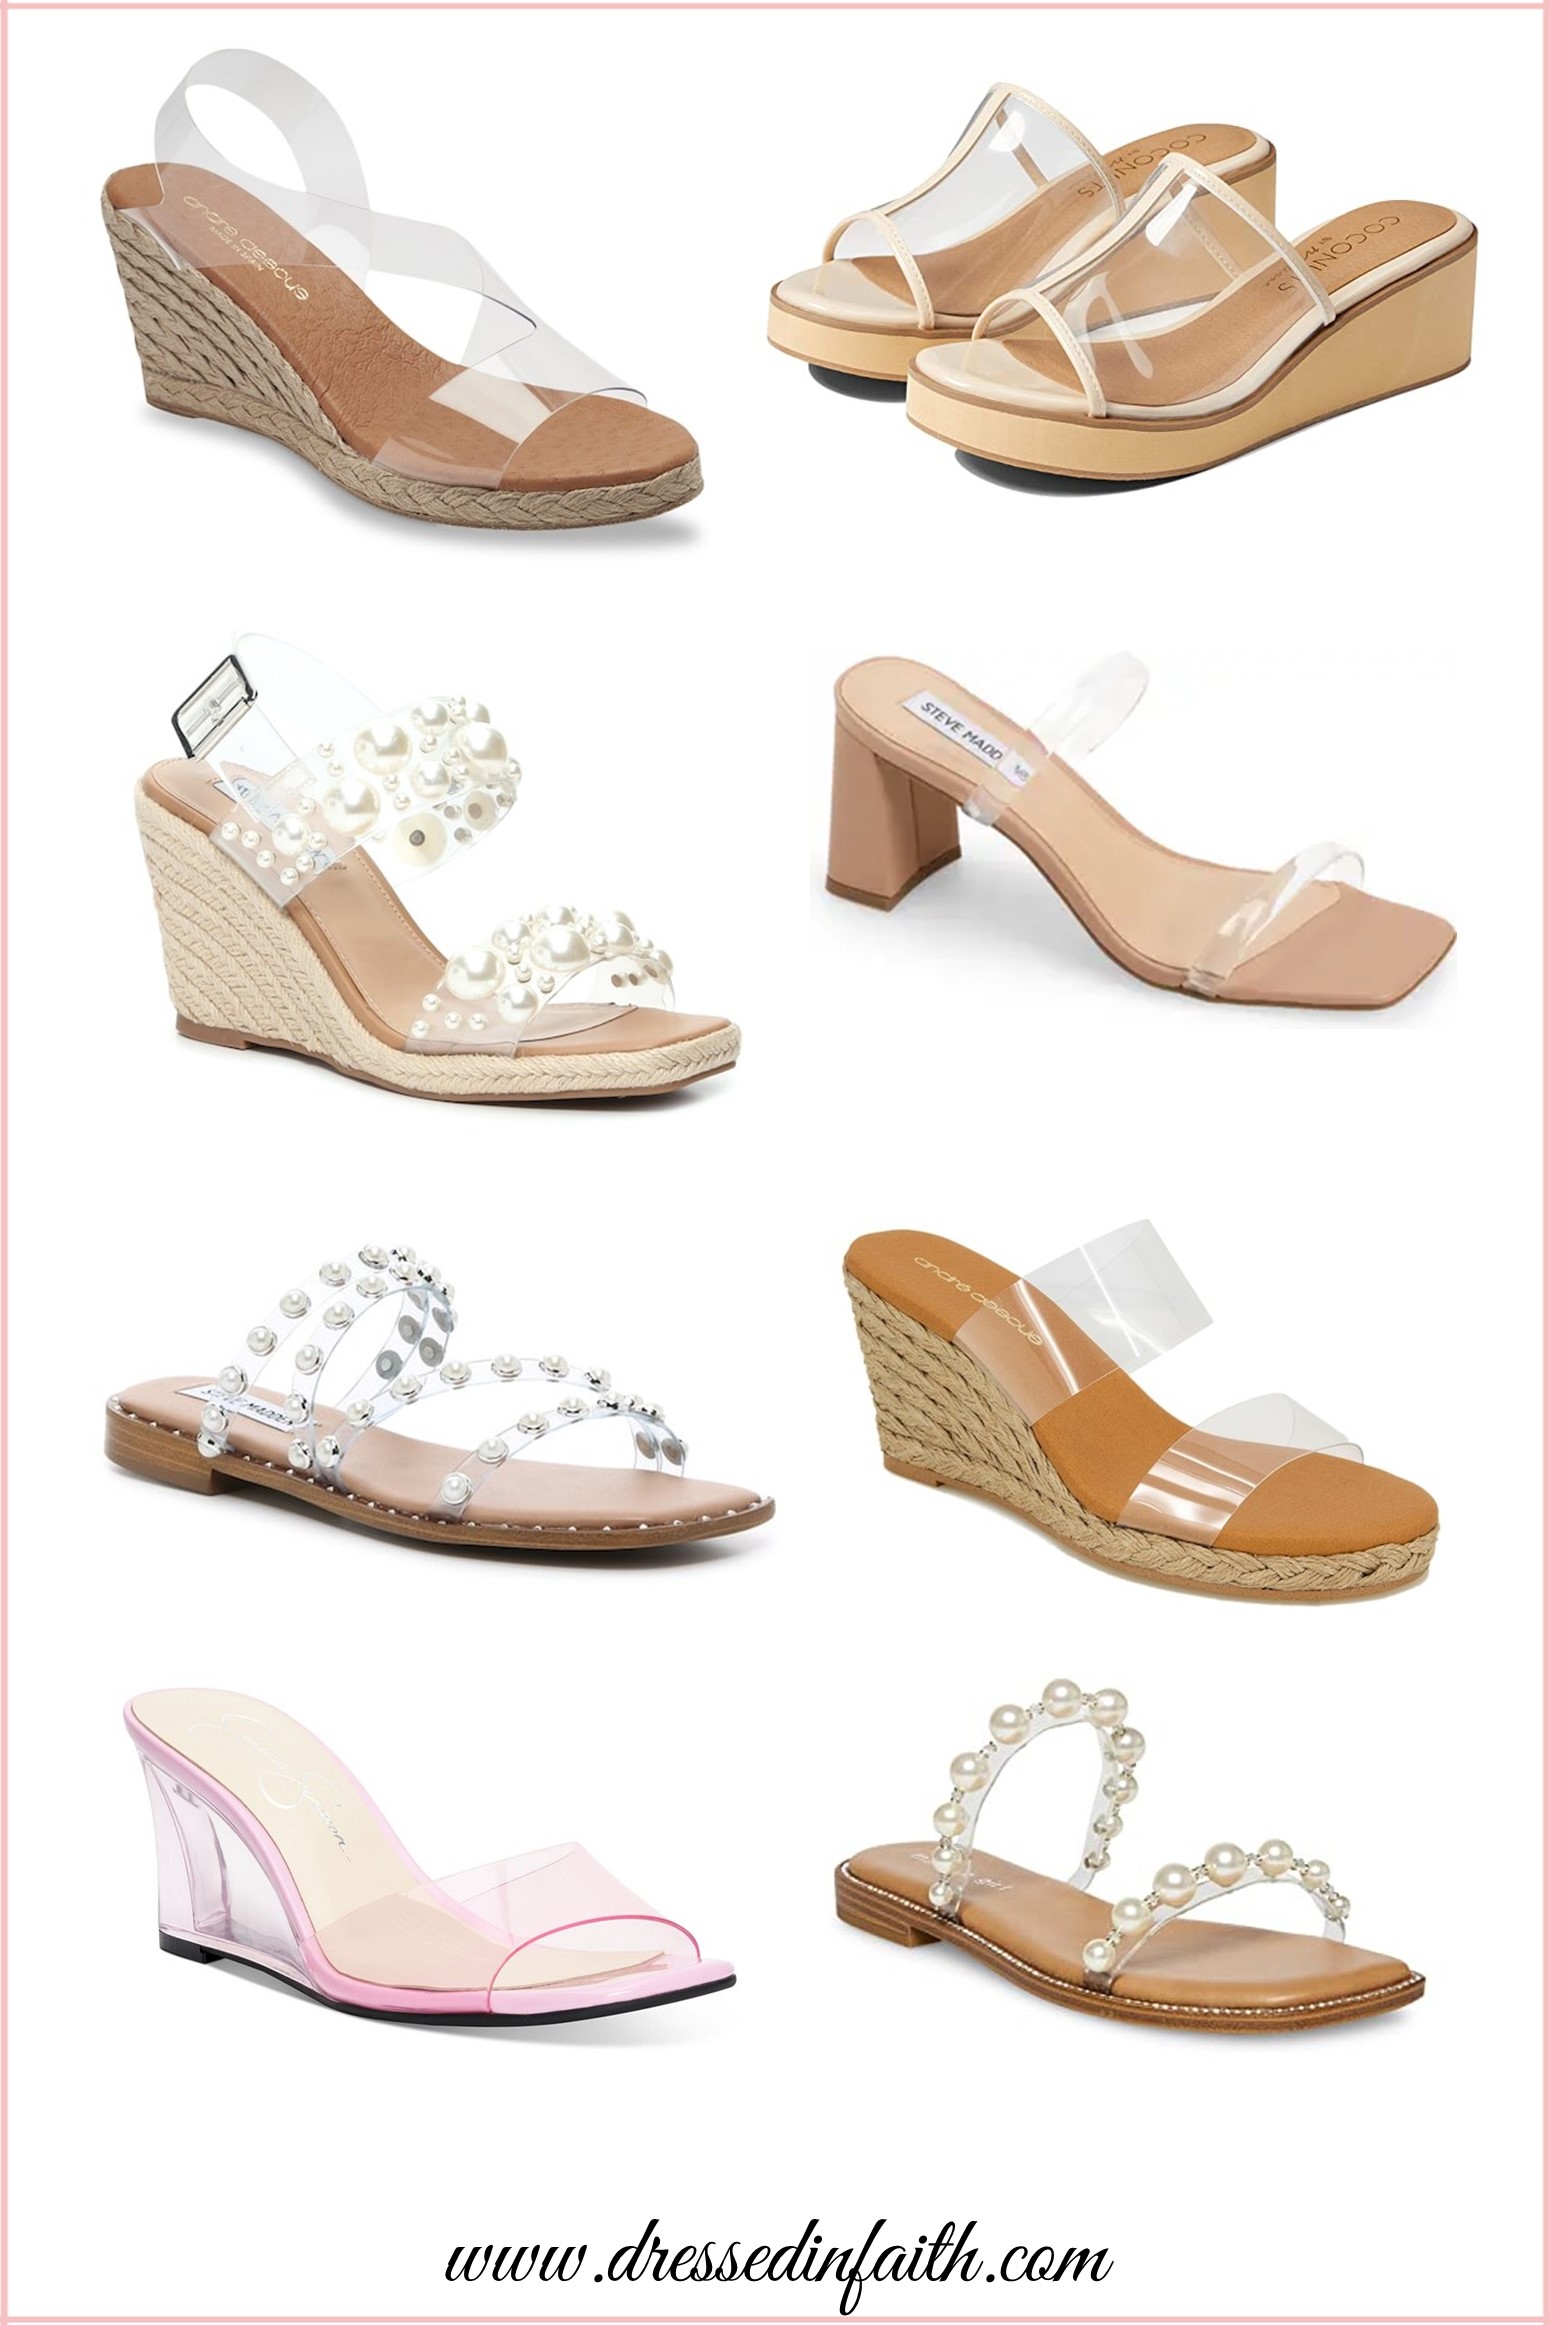 Summer Shoe Style – Clear Sandals